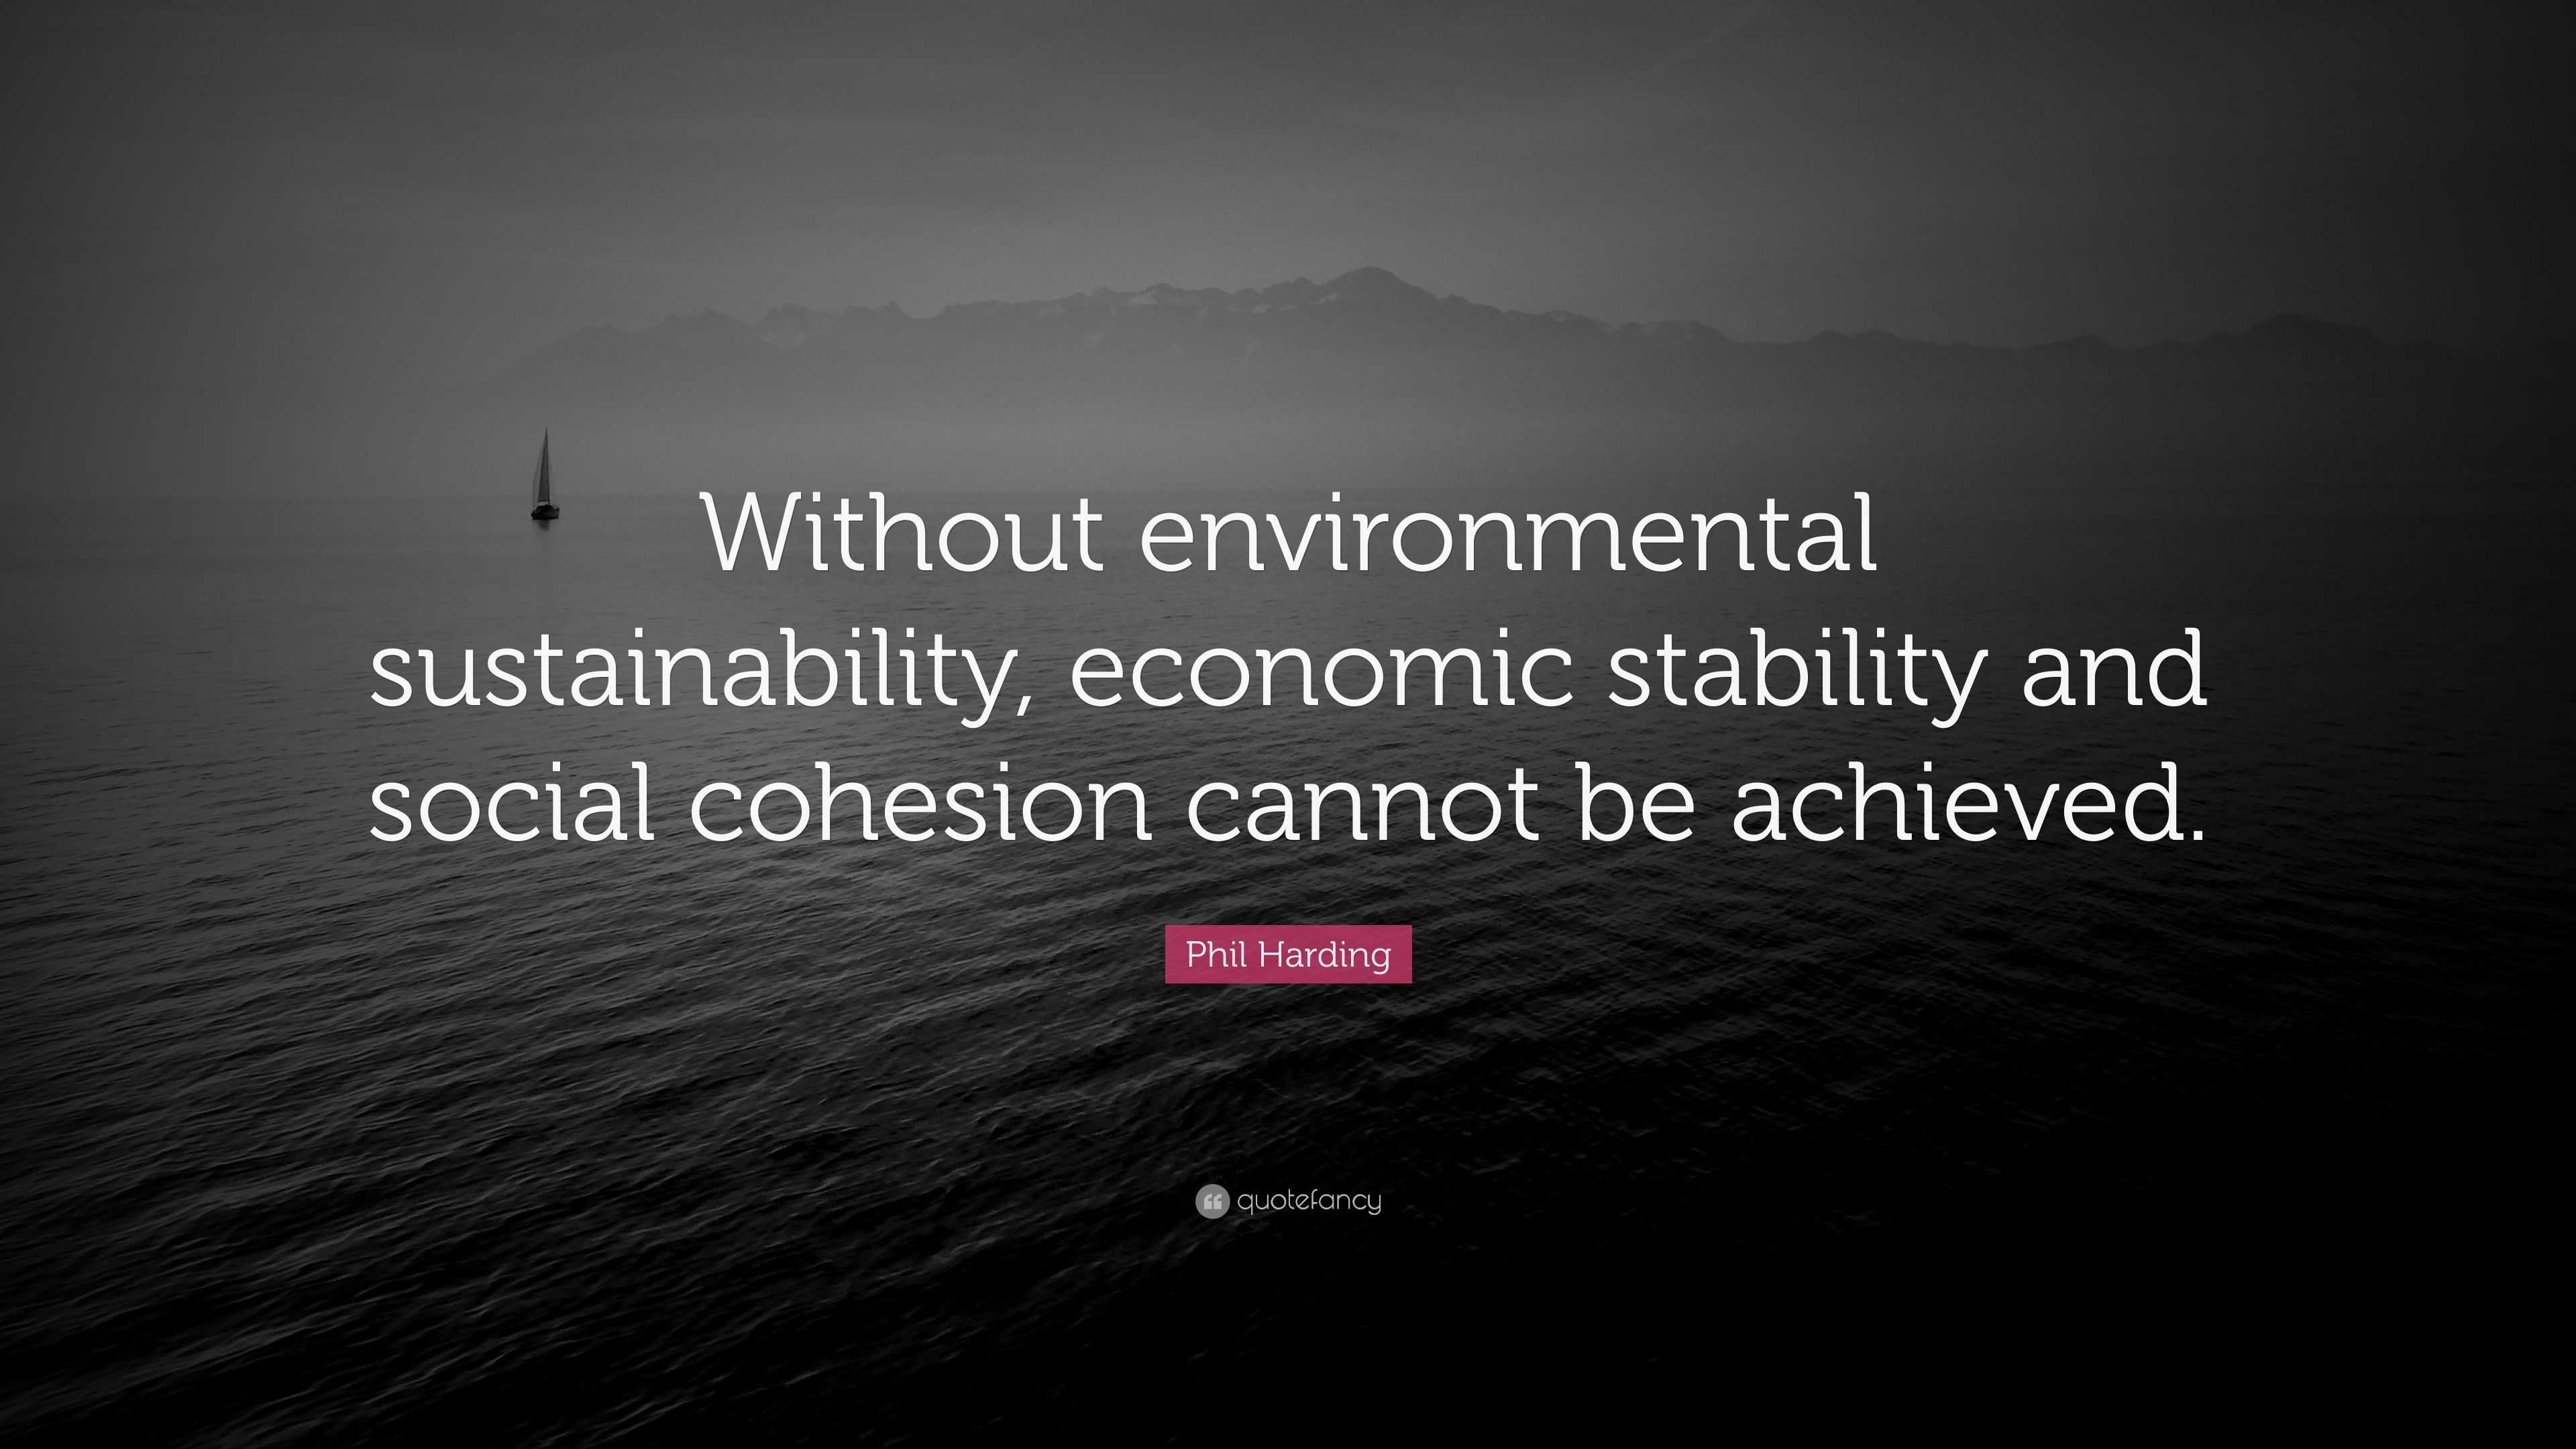 Phil Harding Quote: “Without environmental sustainability, economic